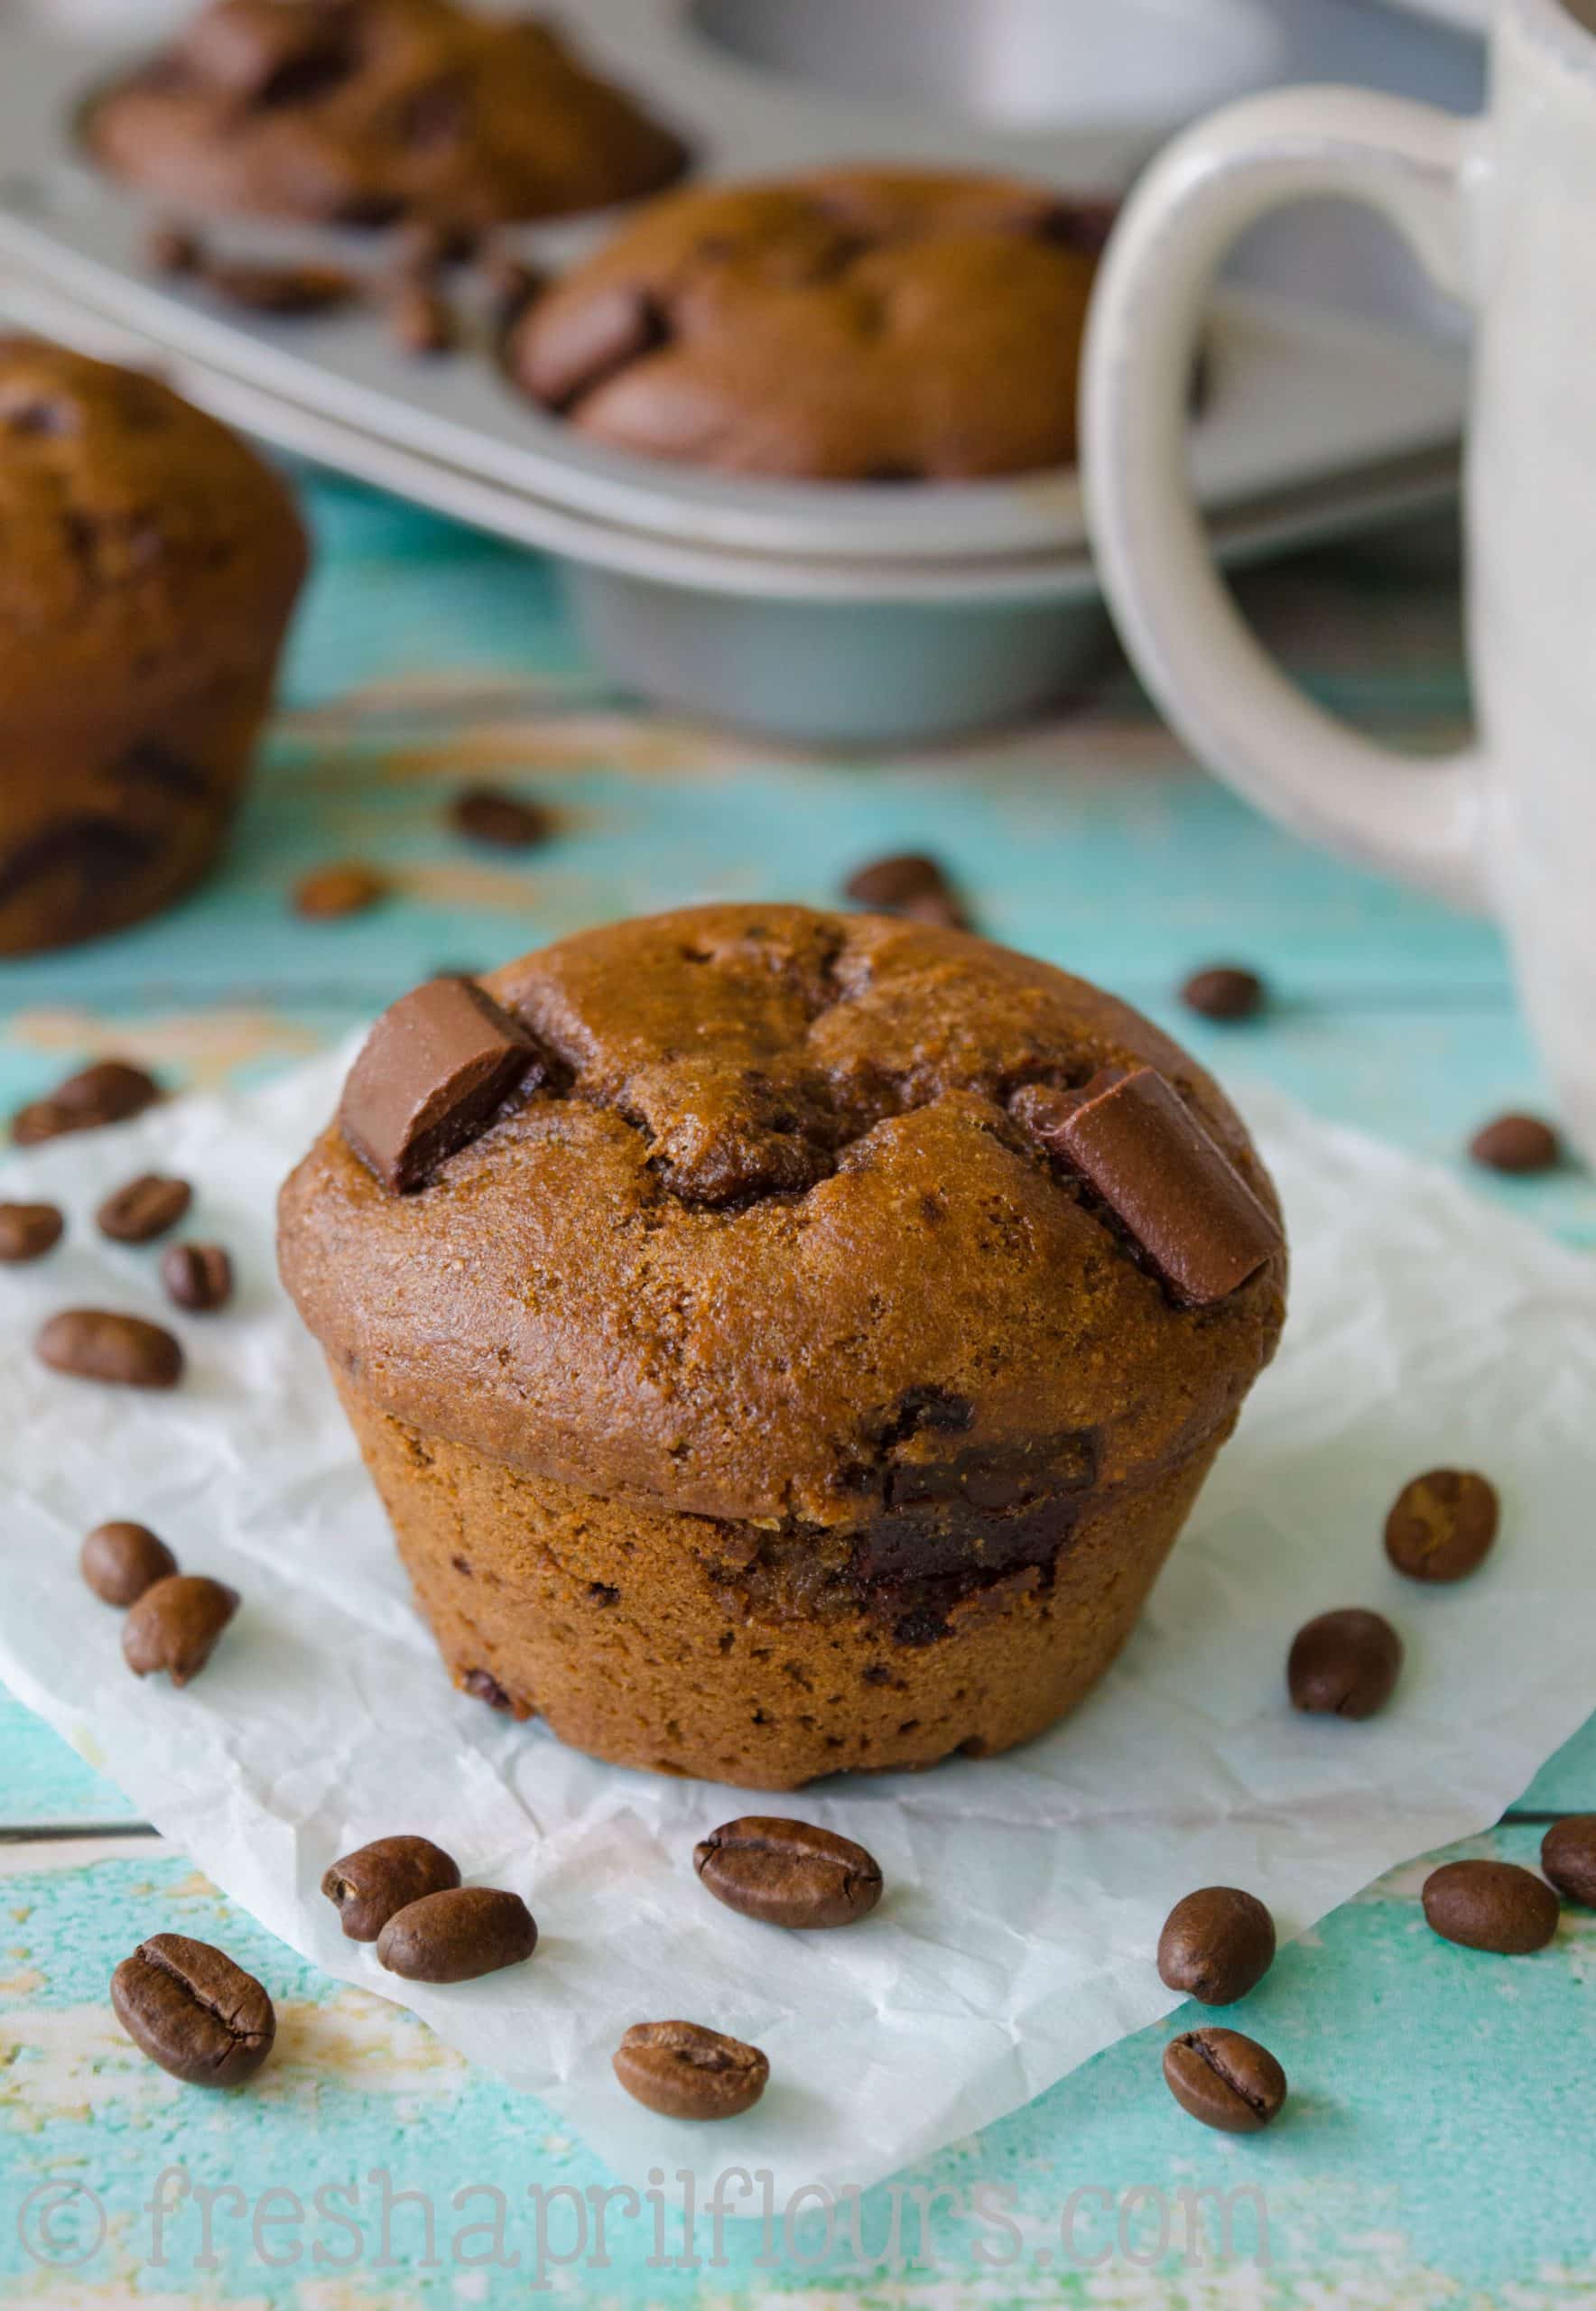 A mocha chocolate chunk muffin on a piece of parchment paper.